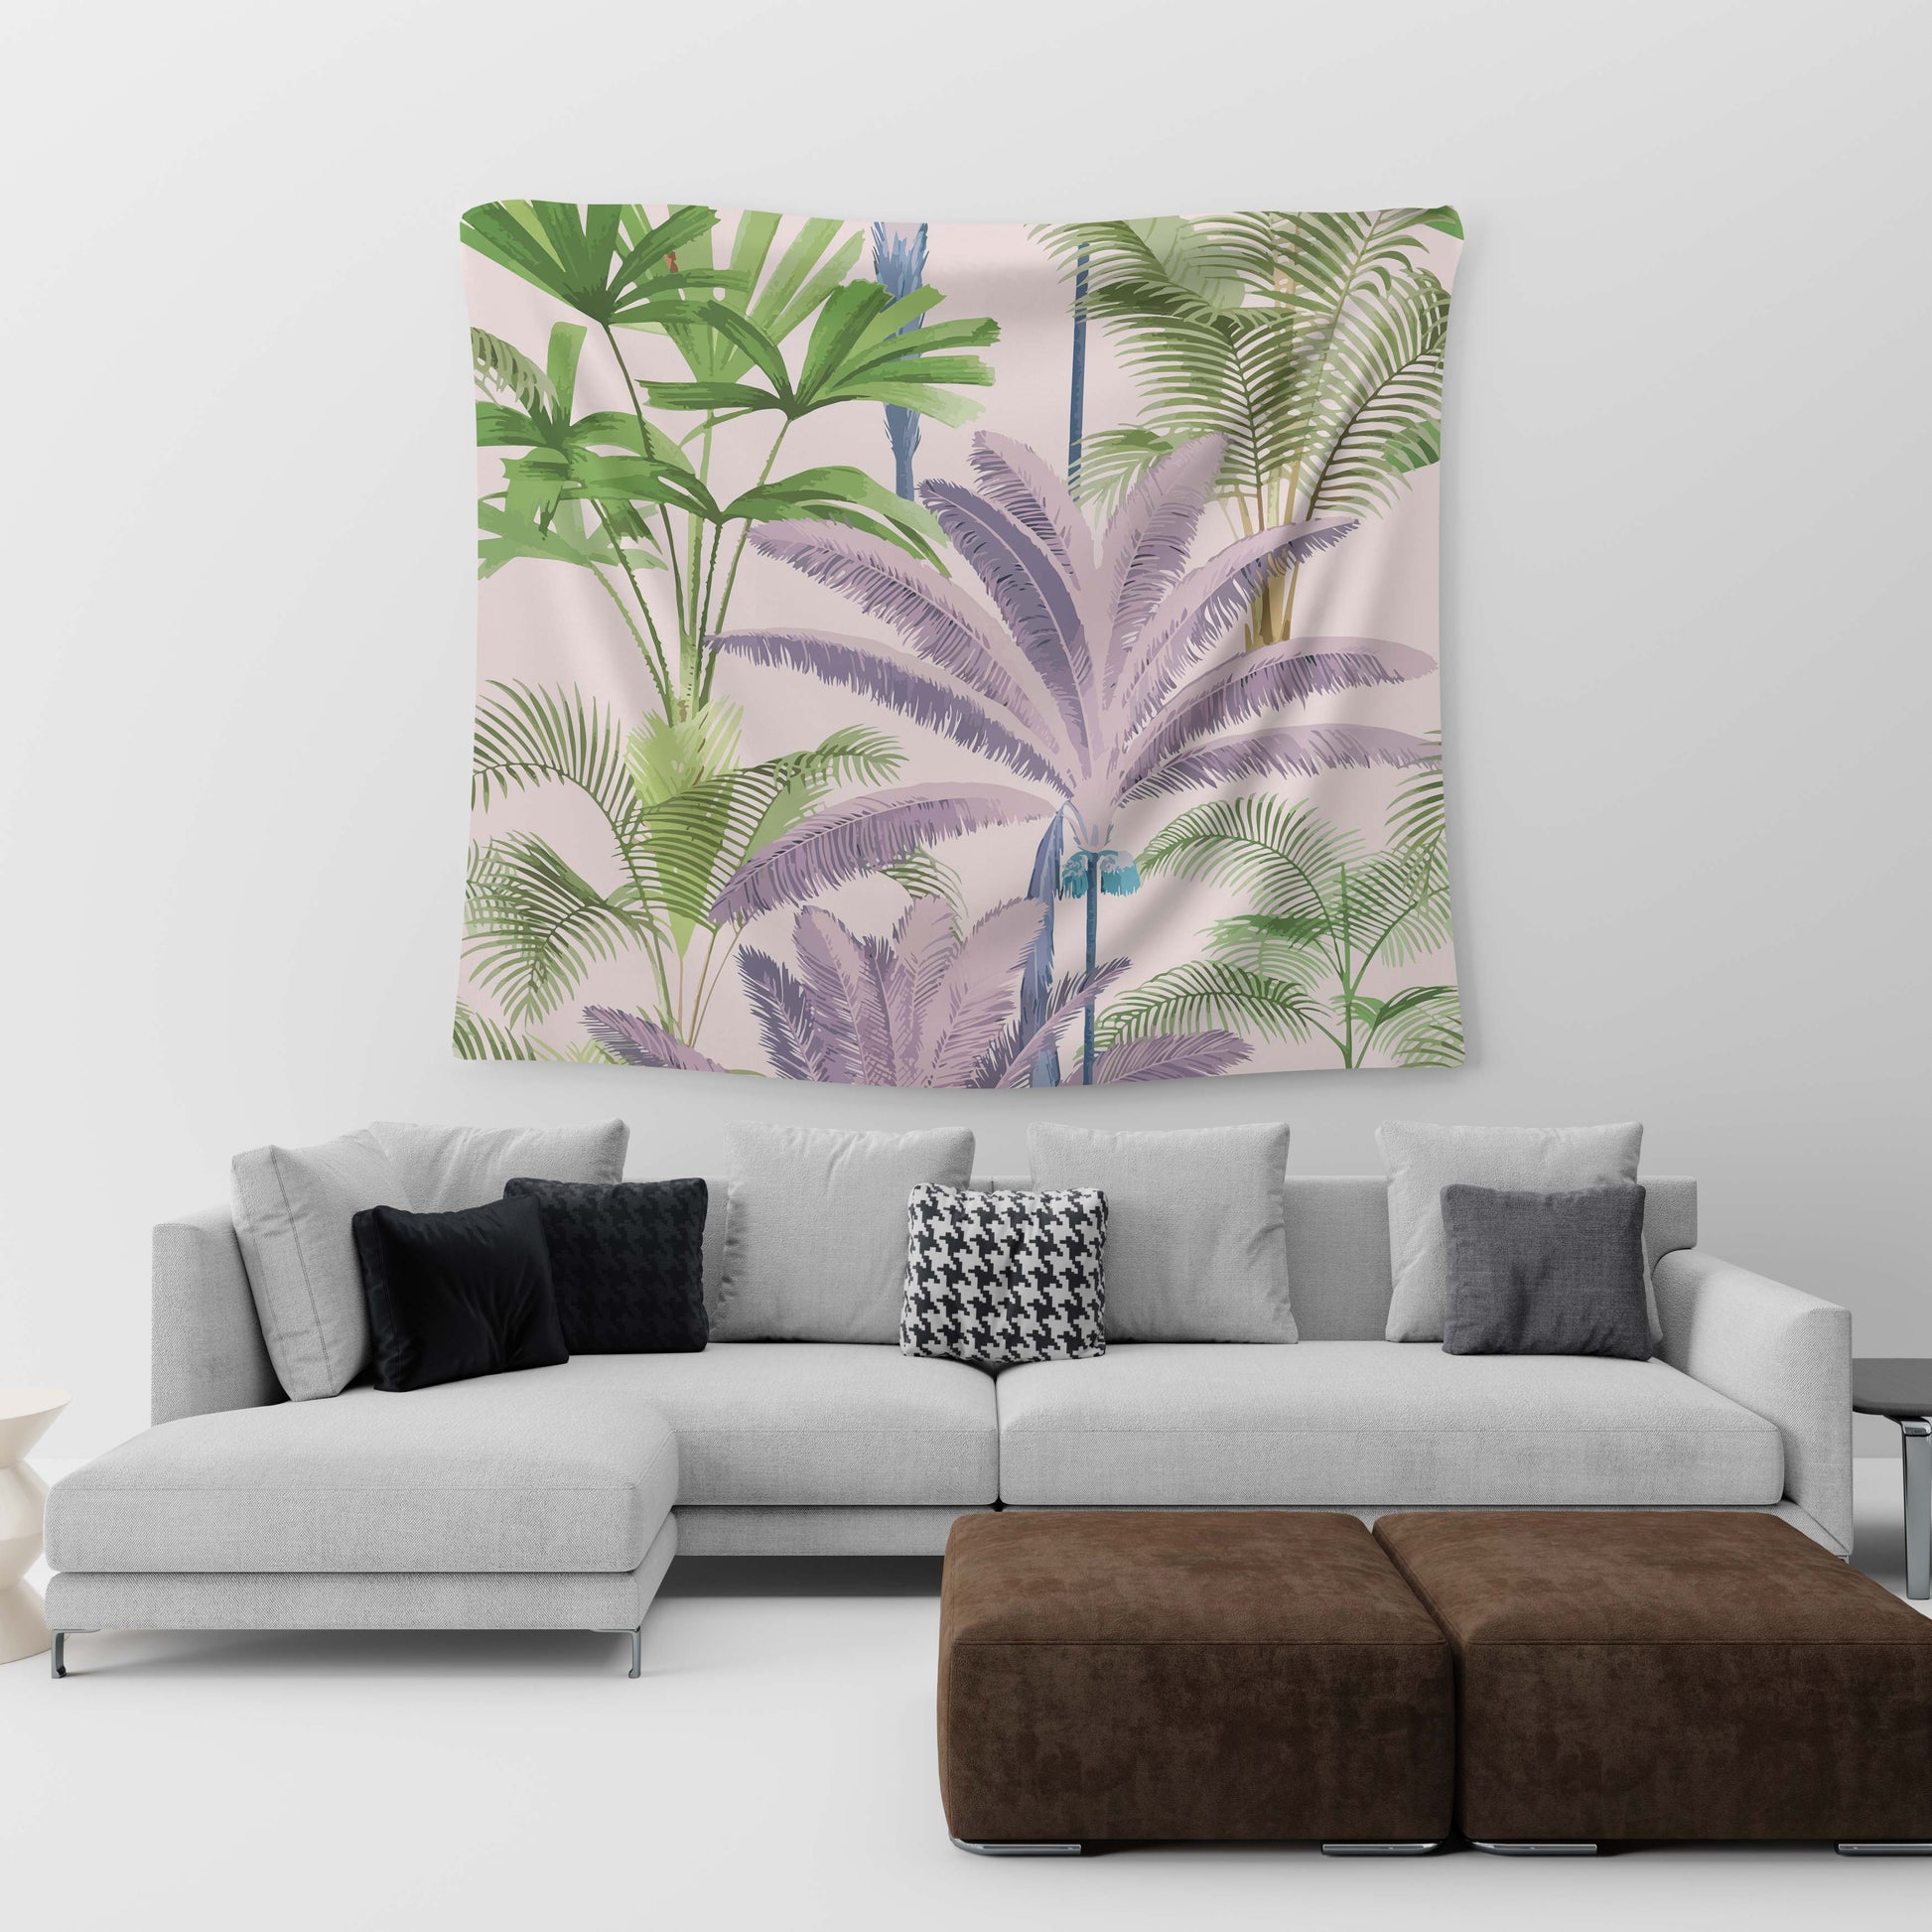 Day Pine Road Tapestry Trendy Home